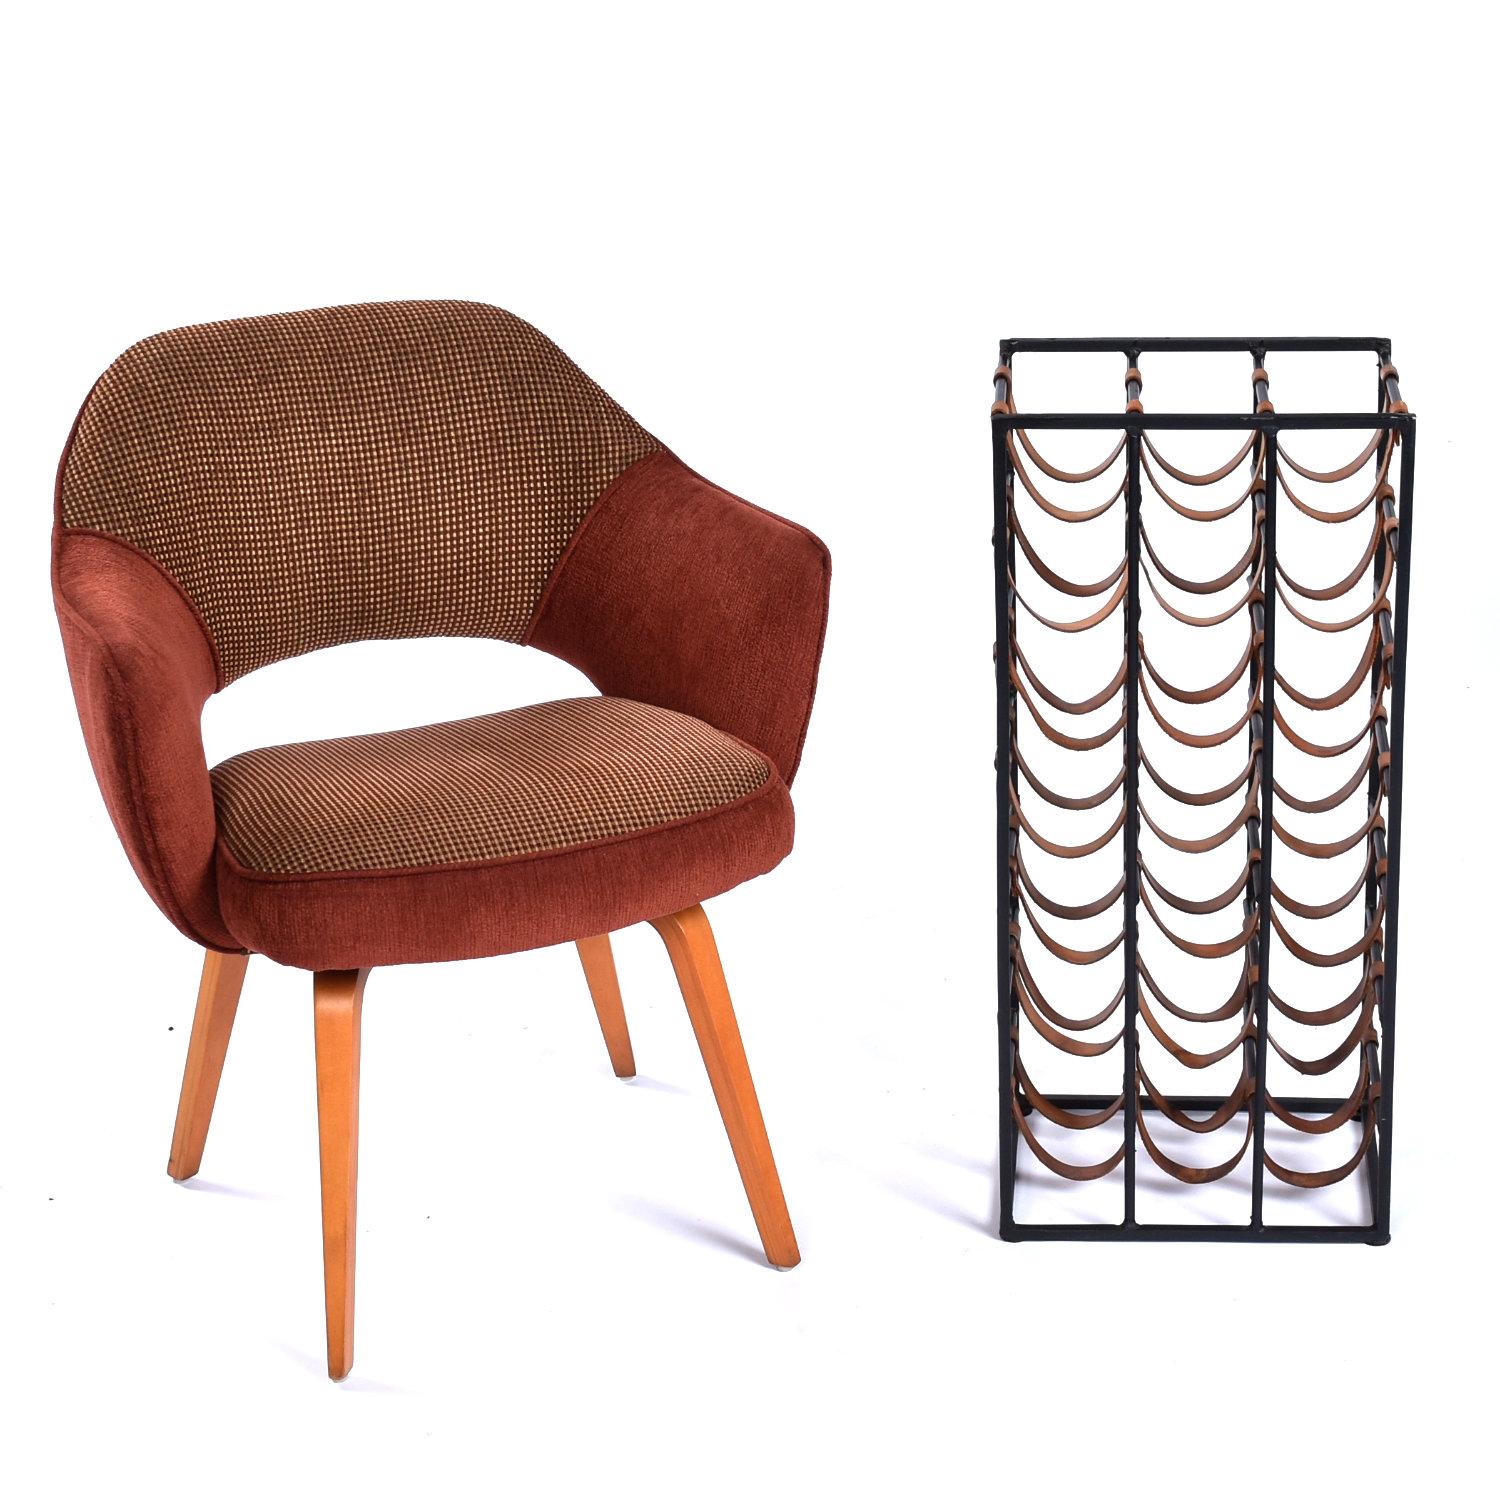 This listing is for the wine rack alone. The chair and other accessories are NOT included.

Iconic Mid-Century Modern leather strap and wrought iron wine rack by Arthur Umanoff. The vintage 1950s wine rack holds 21 wine bottles suspended on leather